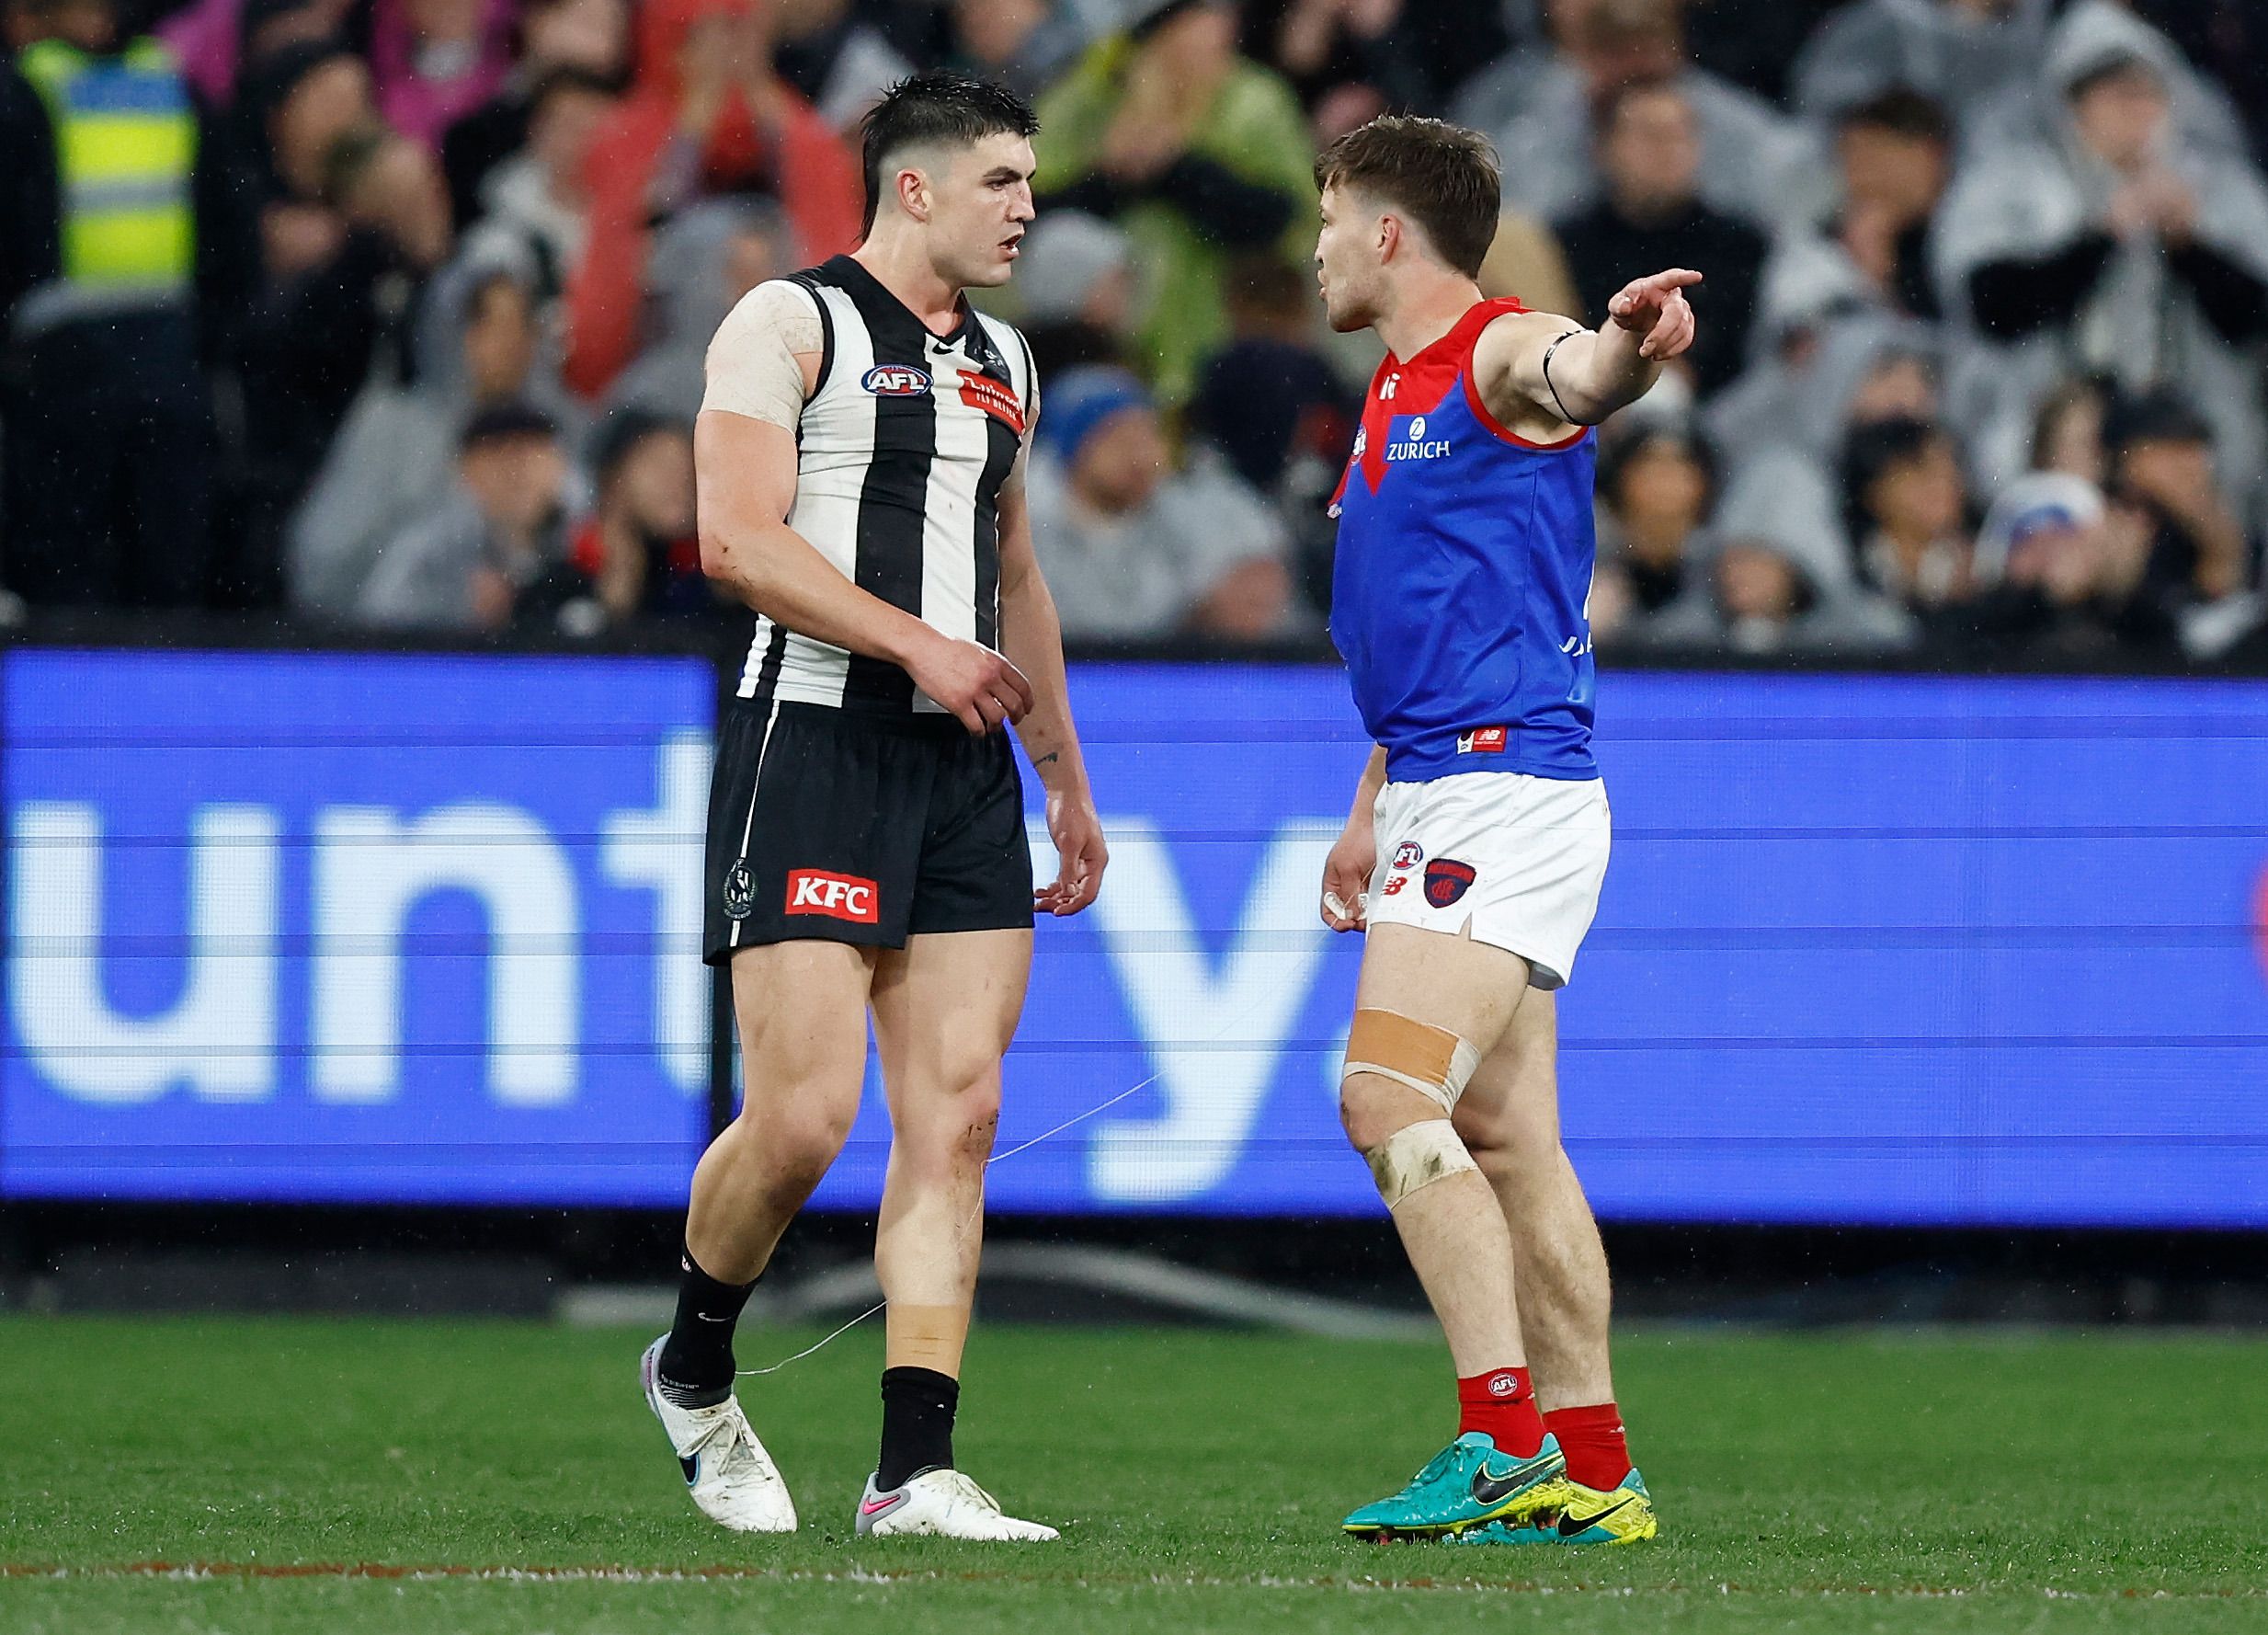 'Everyone knew each other': What really happened when Brayden Maynard visited Angus Brayshaw